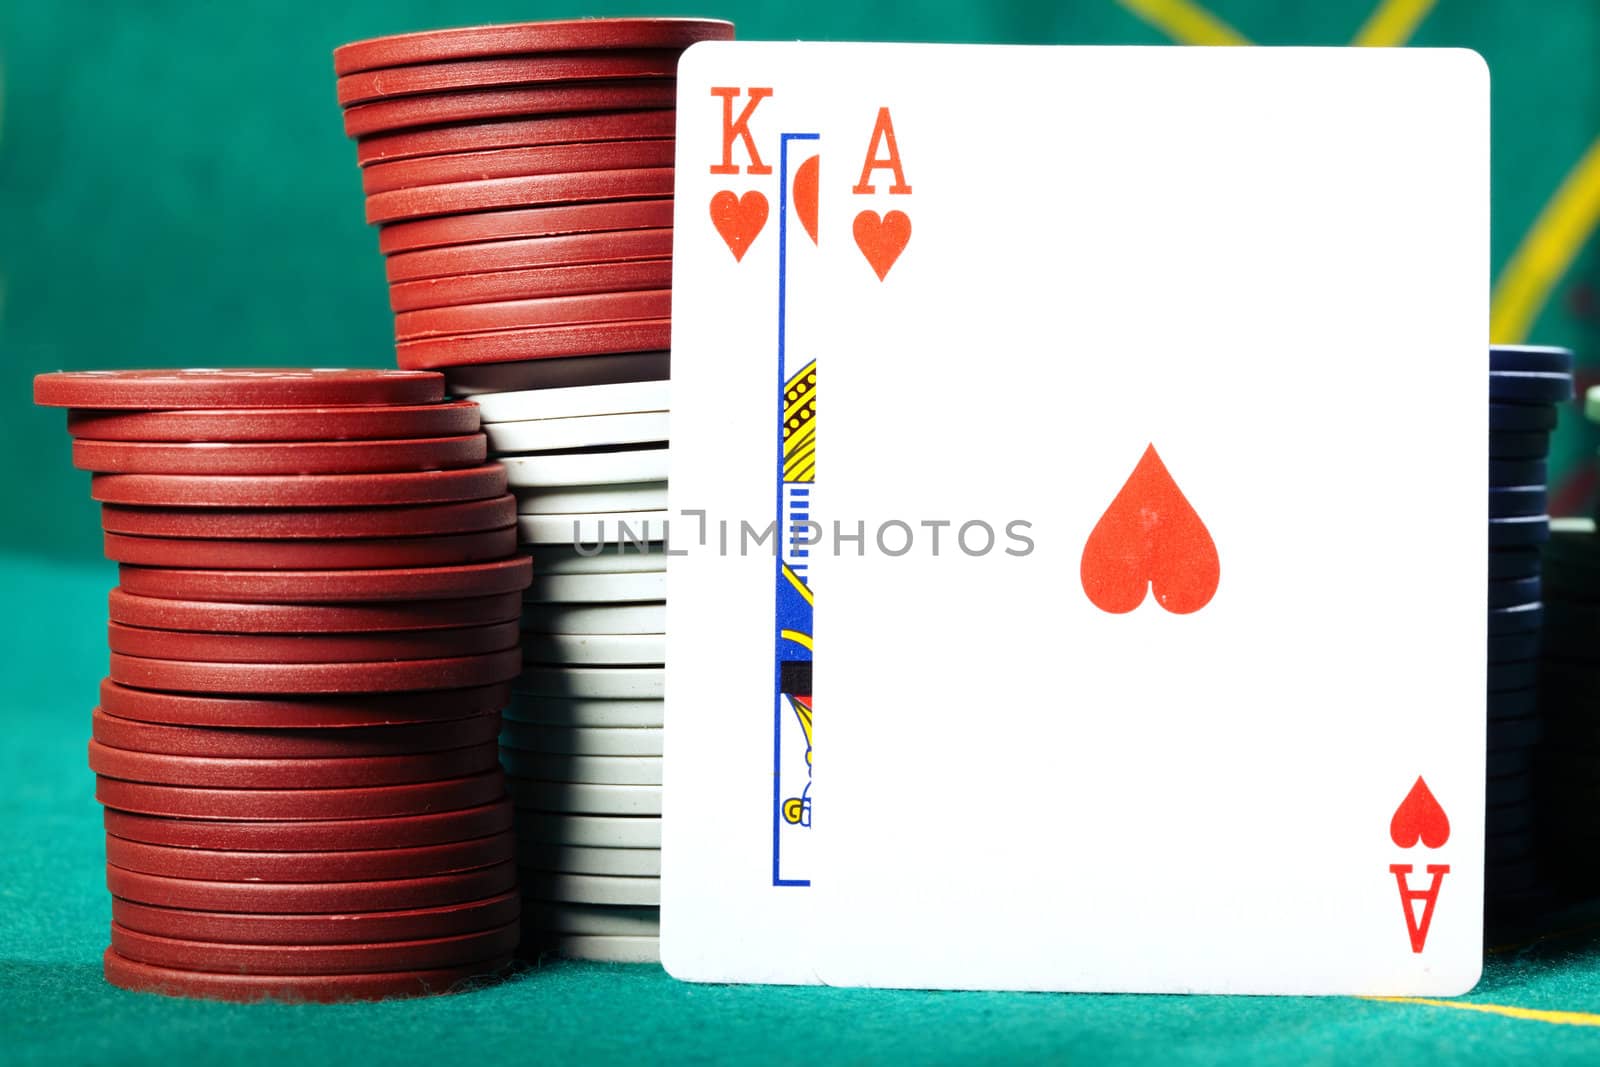 King and ace placed near the poker chips on a green table in casino. Close-up photo with natural colors